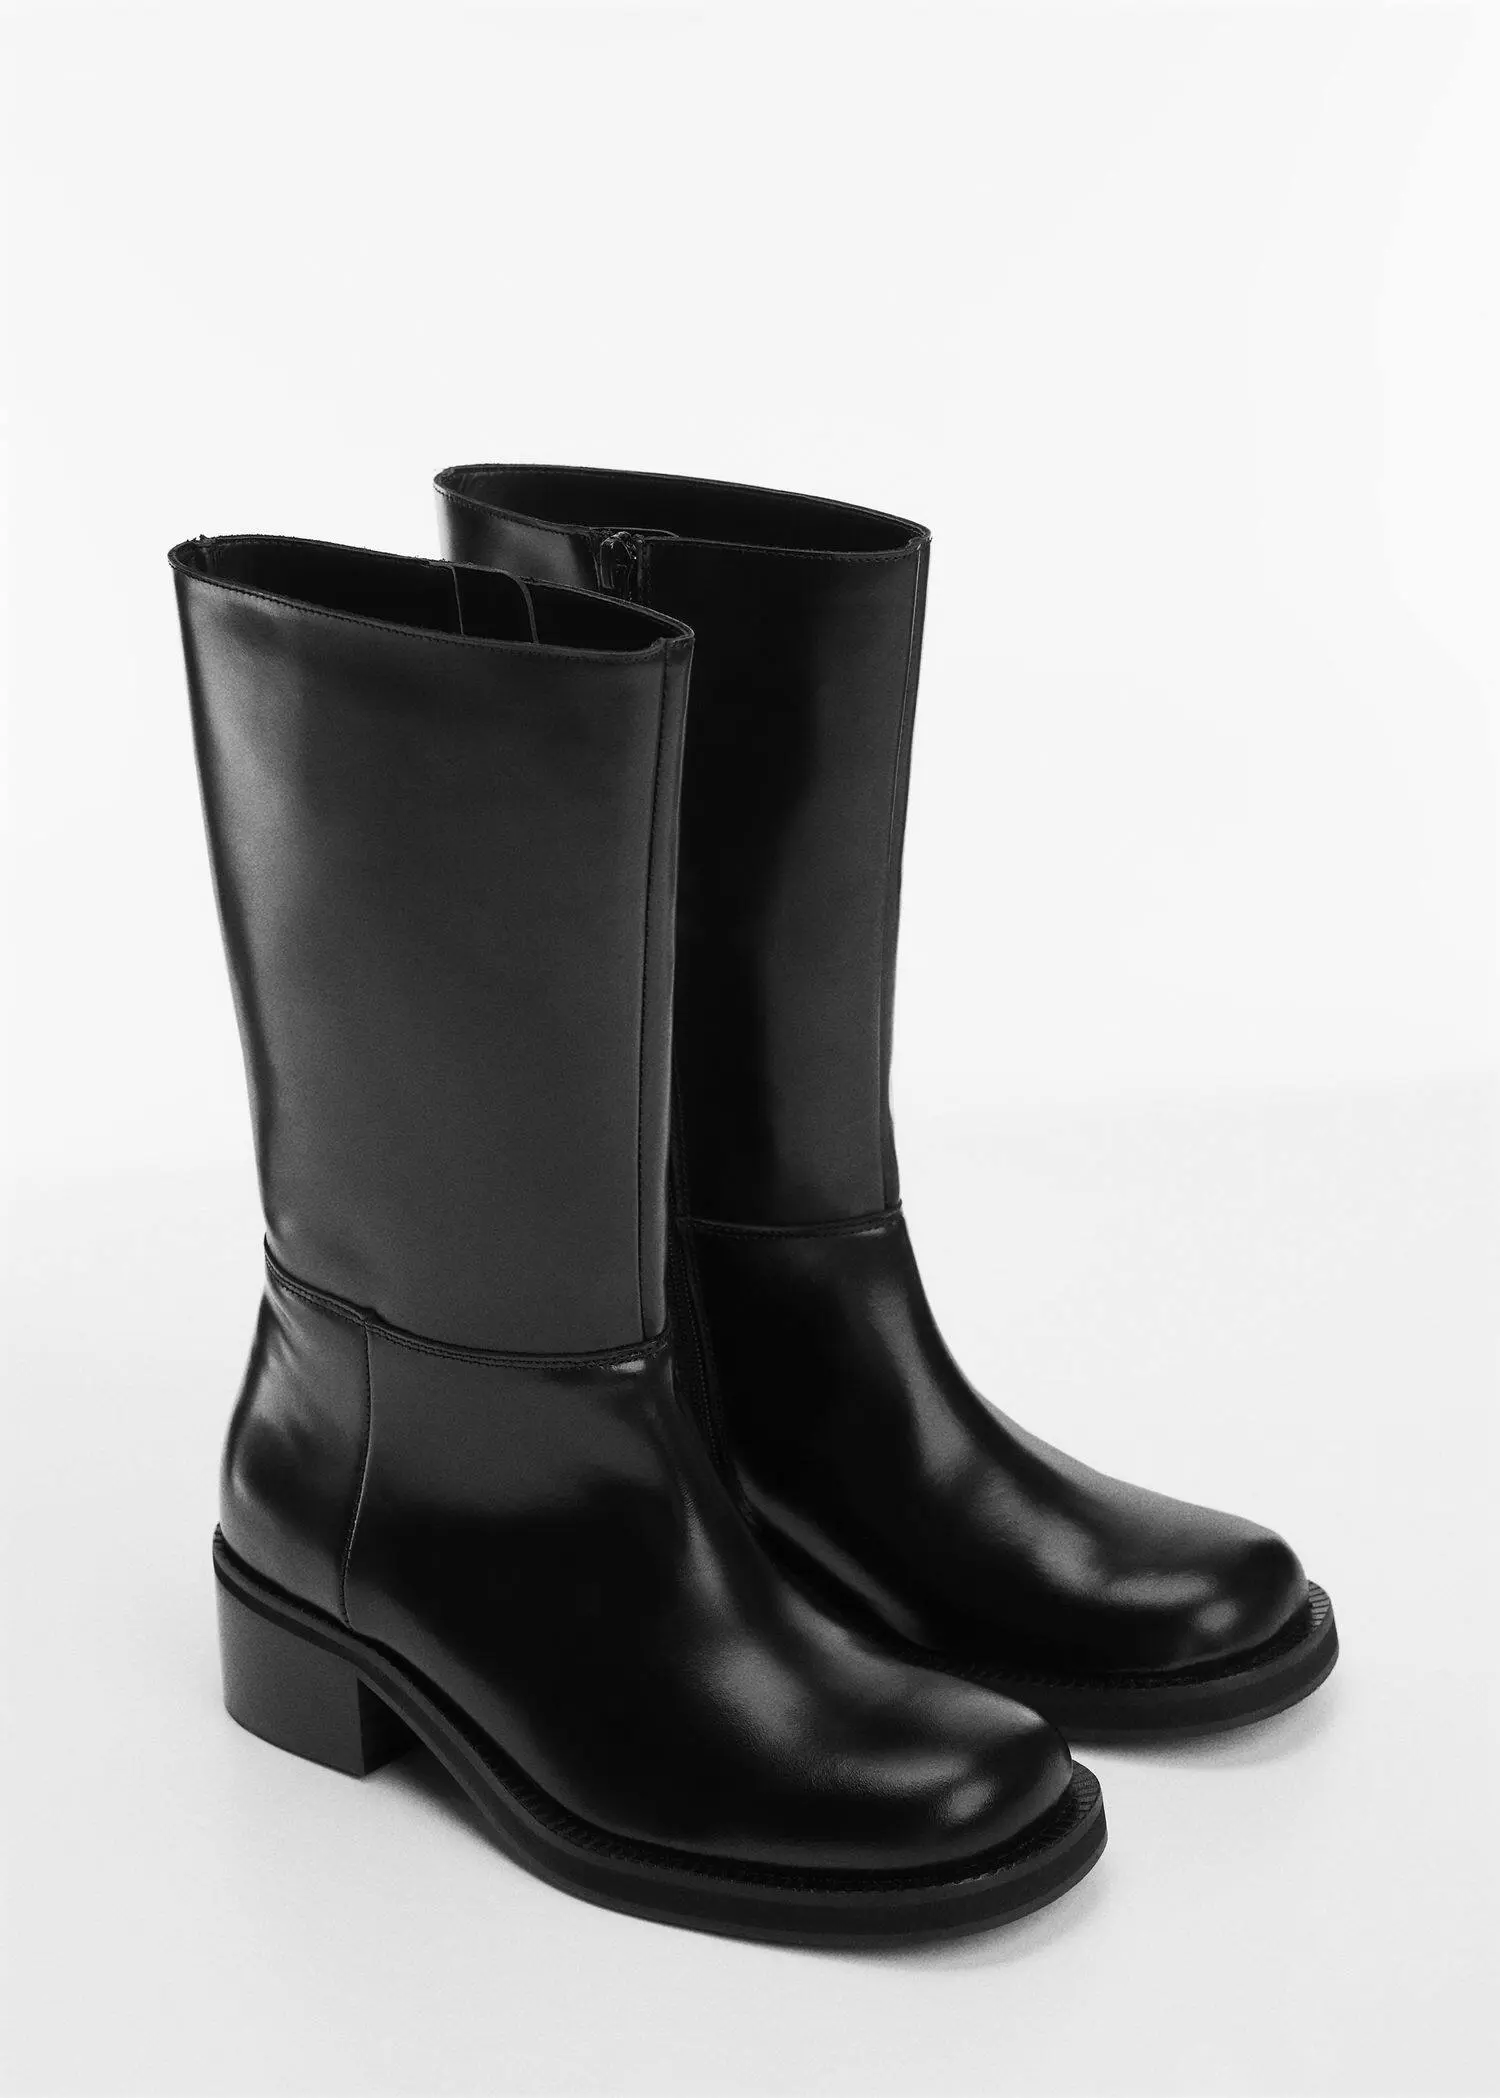 Mango Leather boots with zip closure. 2